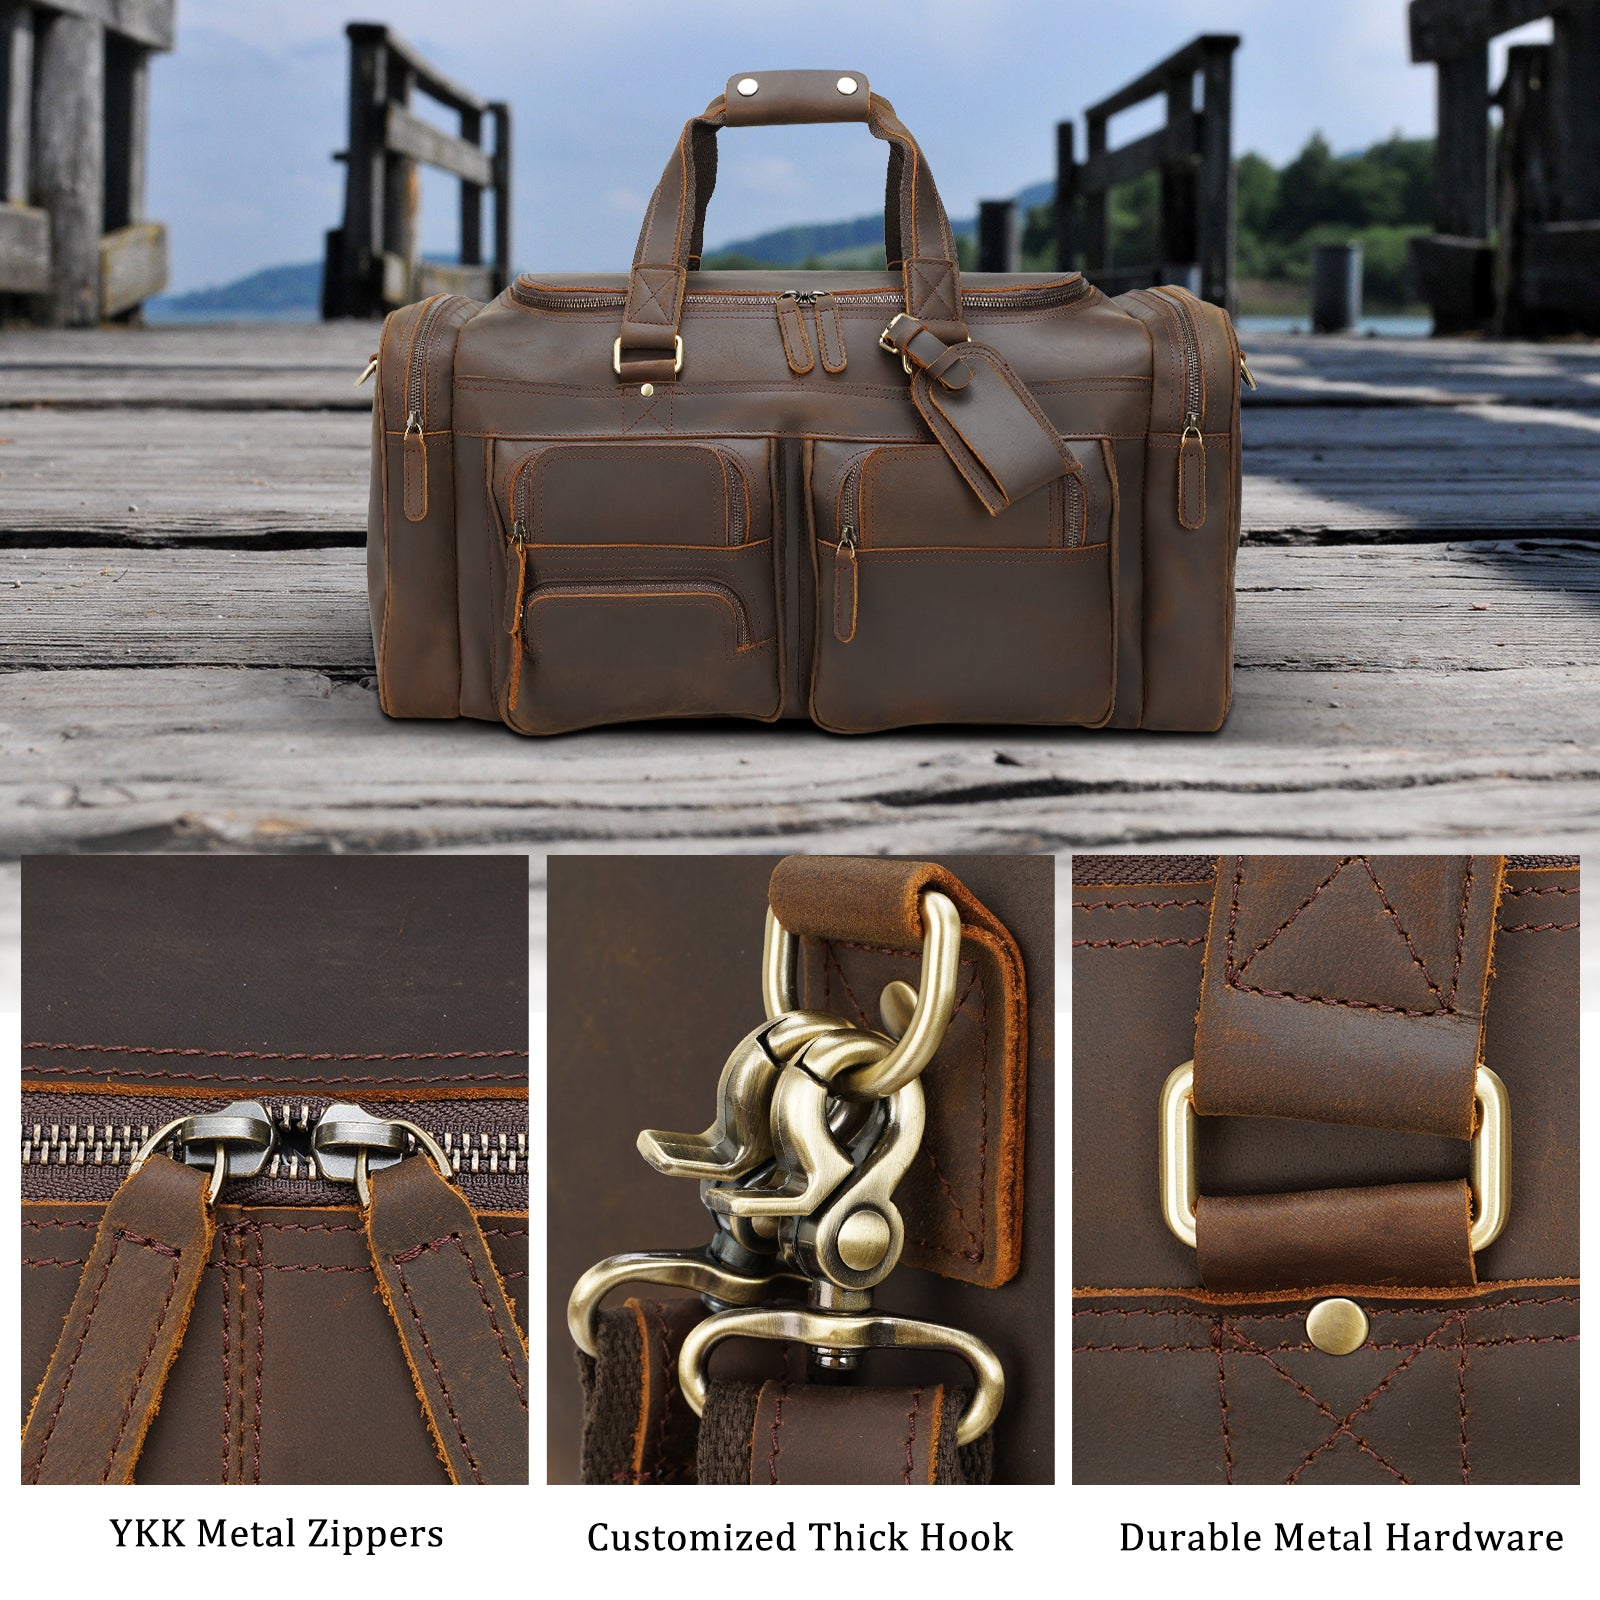 Schneiders® Leather and Cowhide Duffle Bag